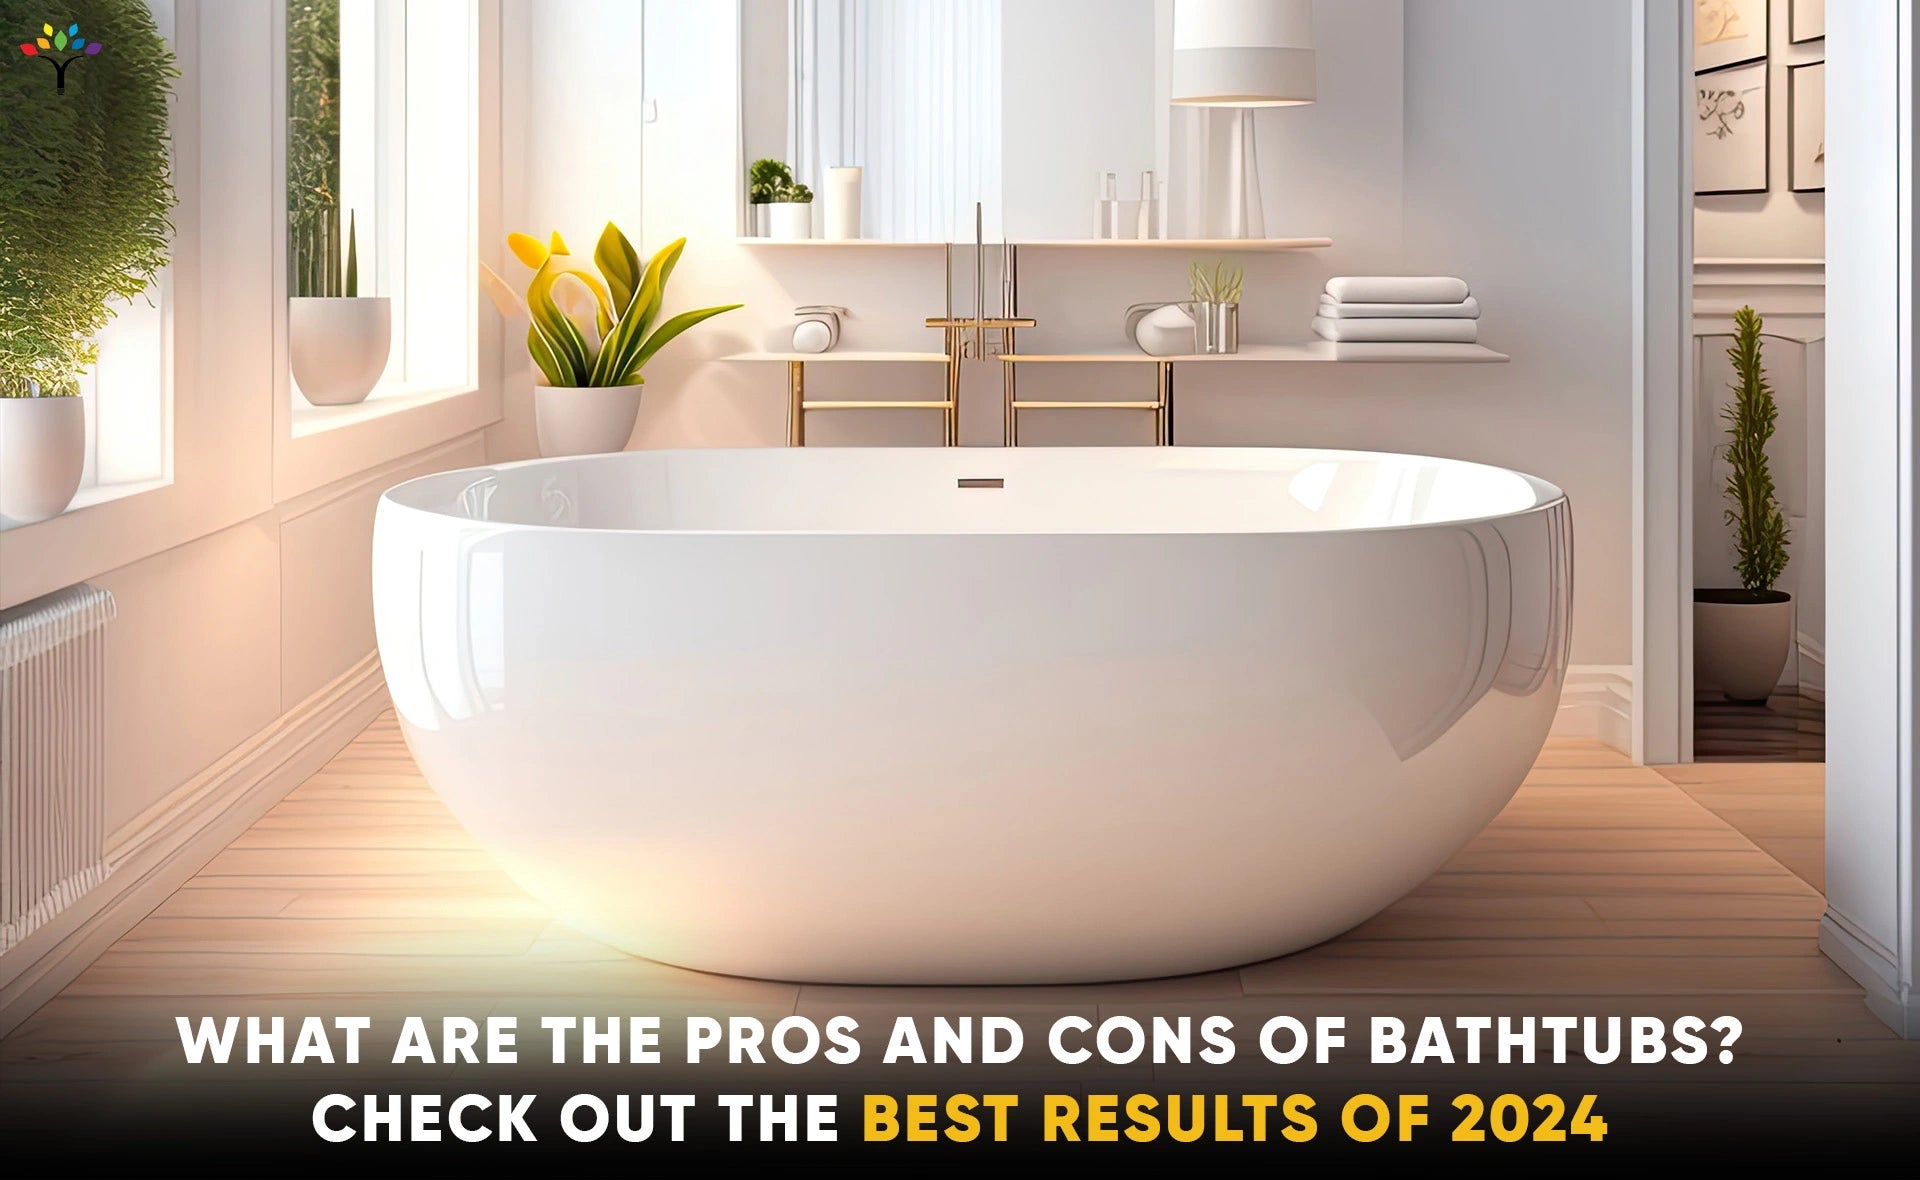 what-are-the-pros-and-cons-of-bathtubs-check-out-the-best-results-of-2024